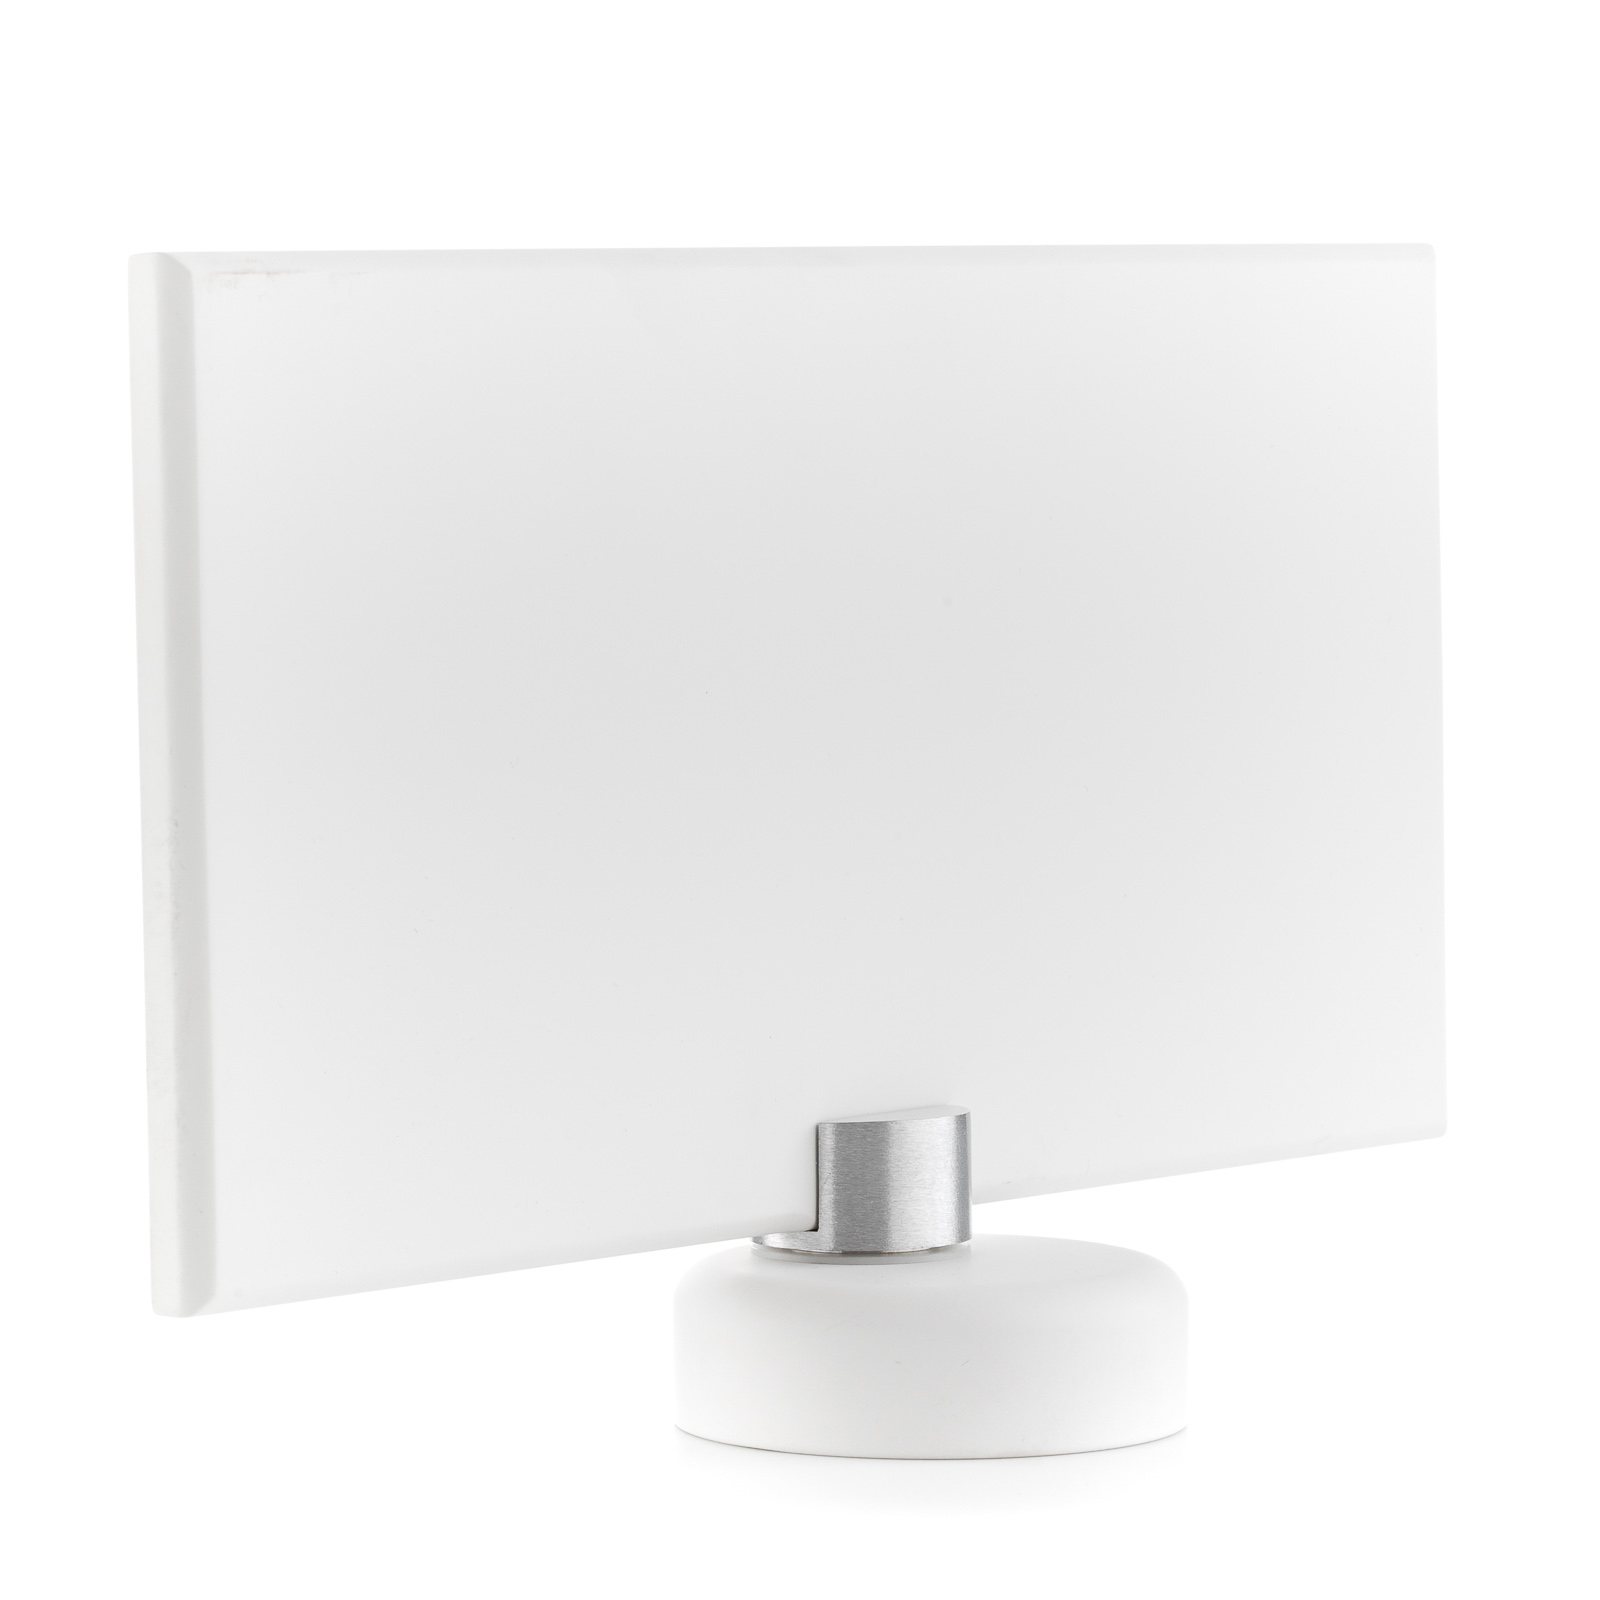 ICONE GiuUp LED wall uplighter 40W, white